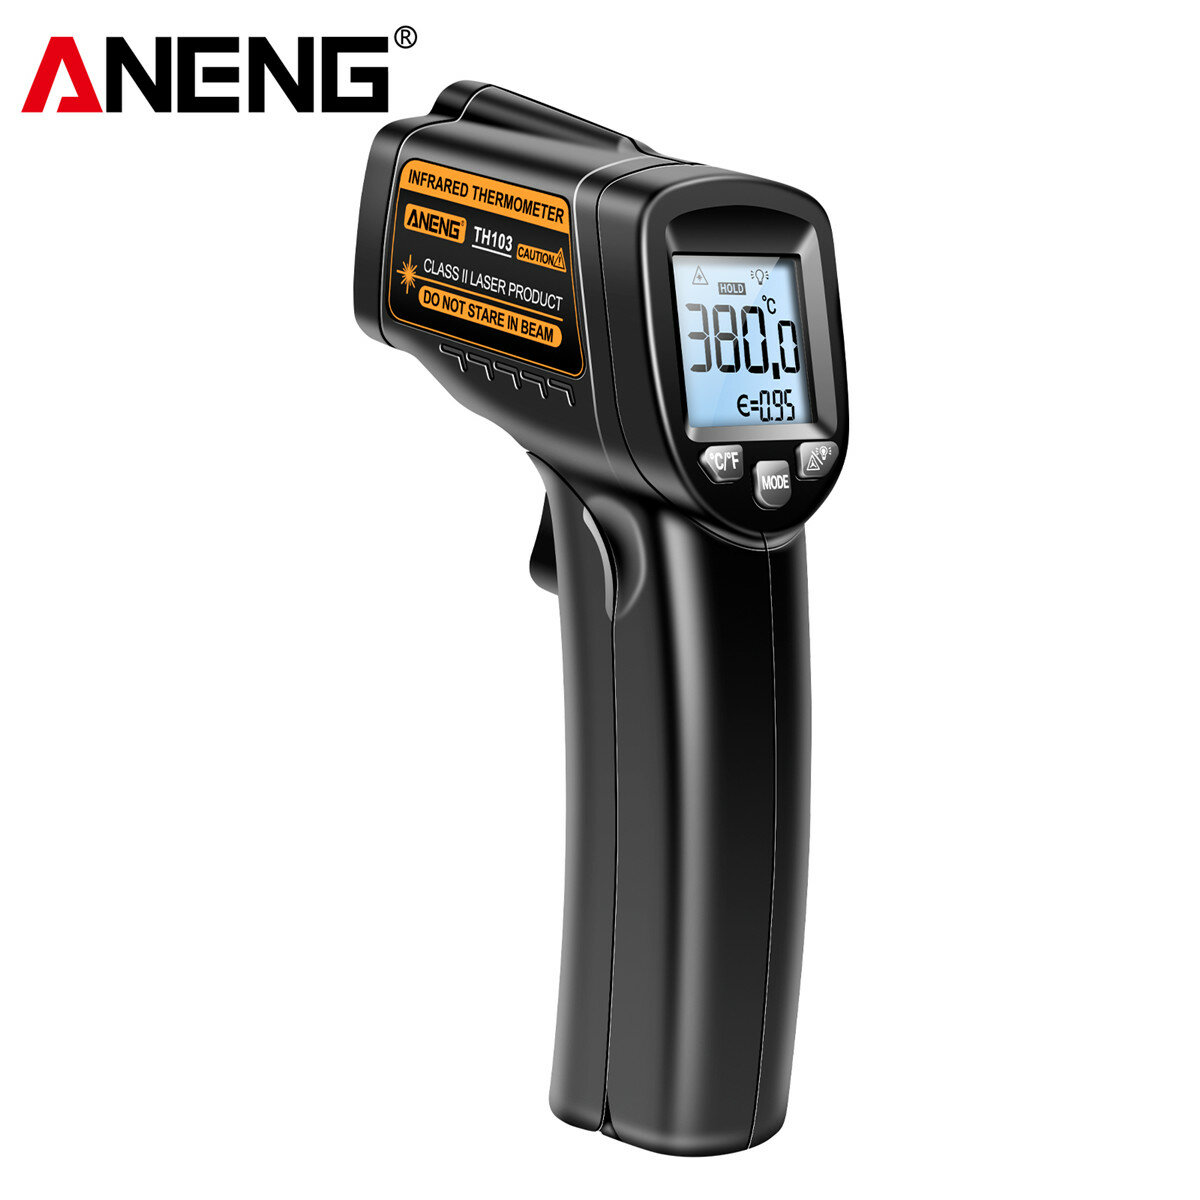 ANENG TH103 Class II Laser Infrared Thermometer Temperature Sensor Testers Gun -20°C~380℃ Industrial Thermal Tube Testing Tools COD